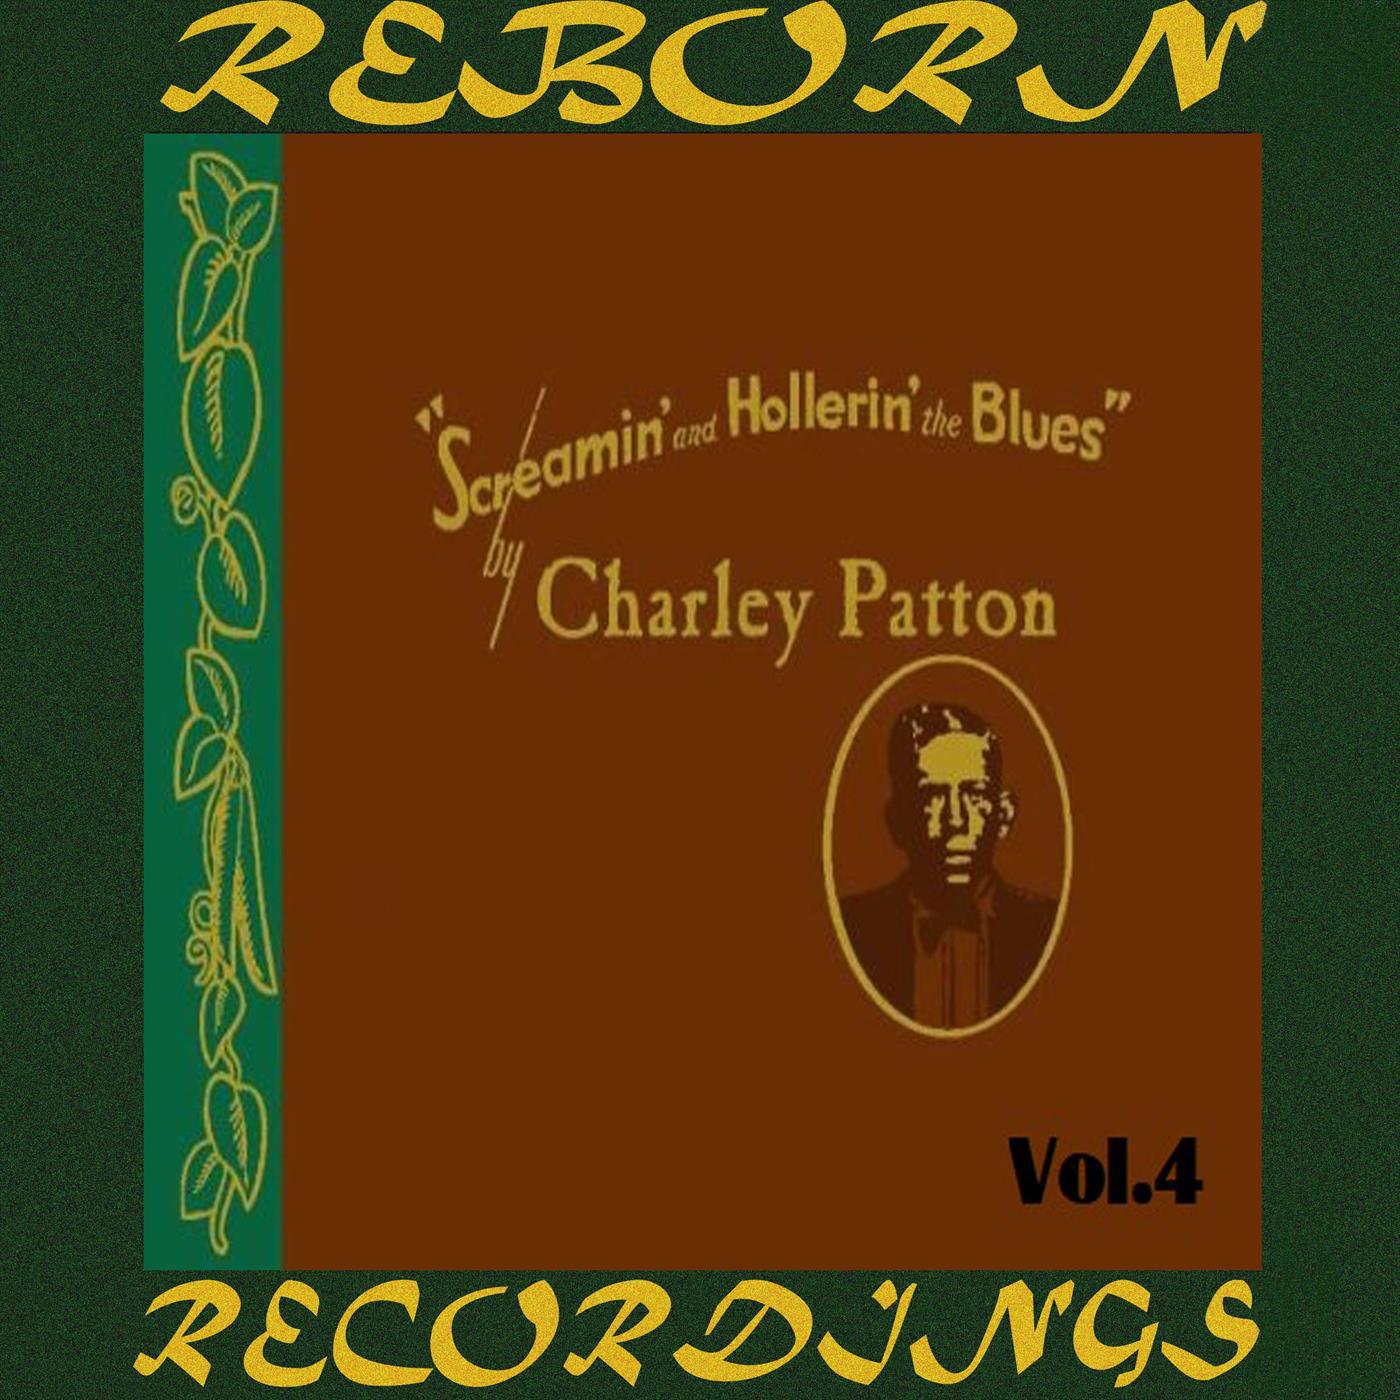 Screamin' and Hollerin' the Blues The Worlds of Charley Patton, Vol.4 (HD Remastered)